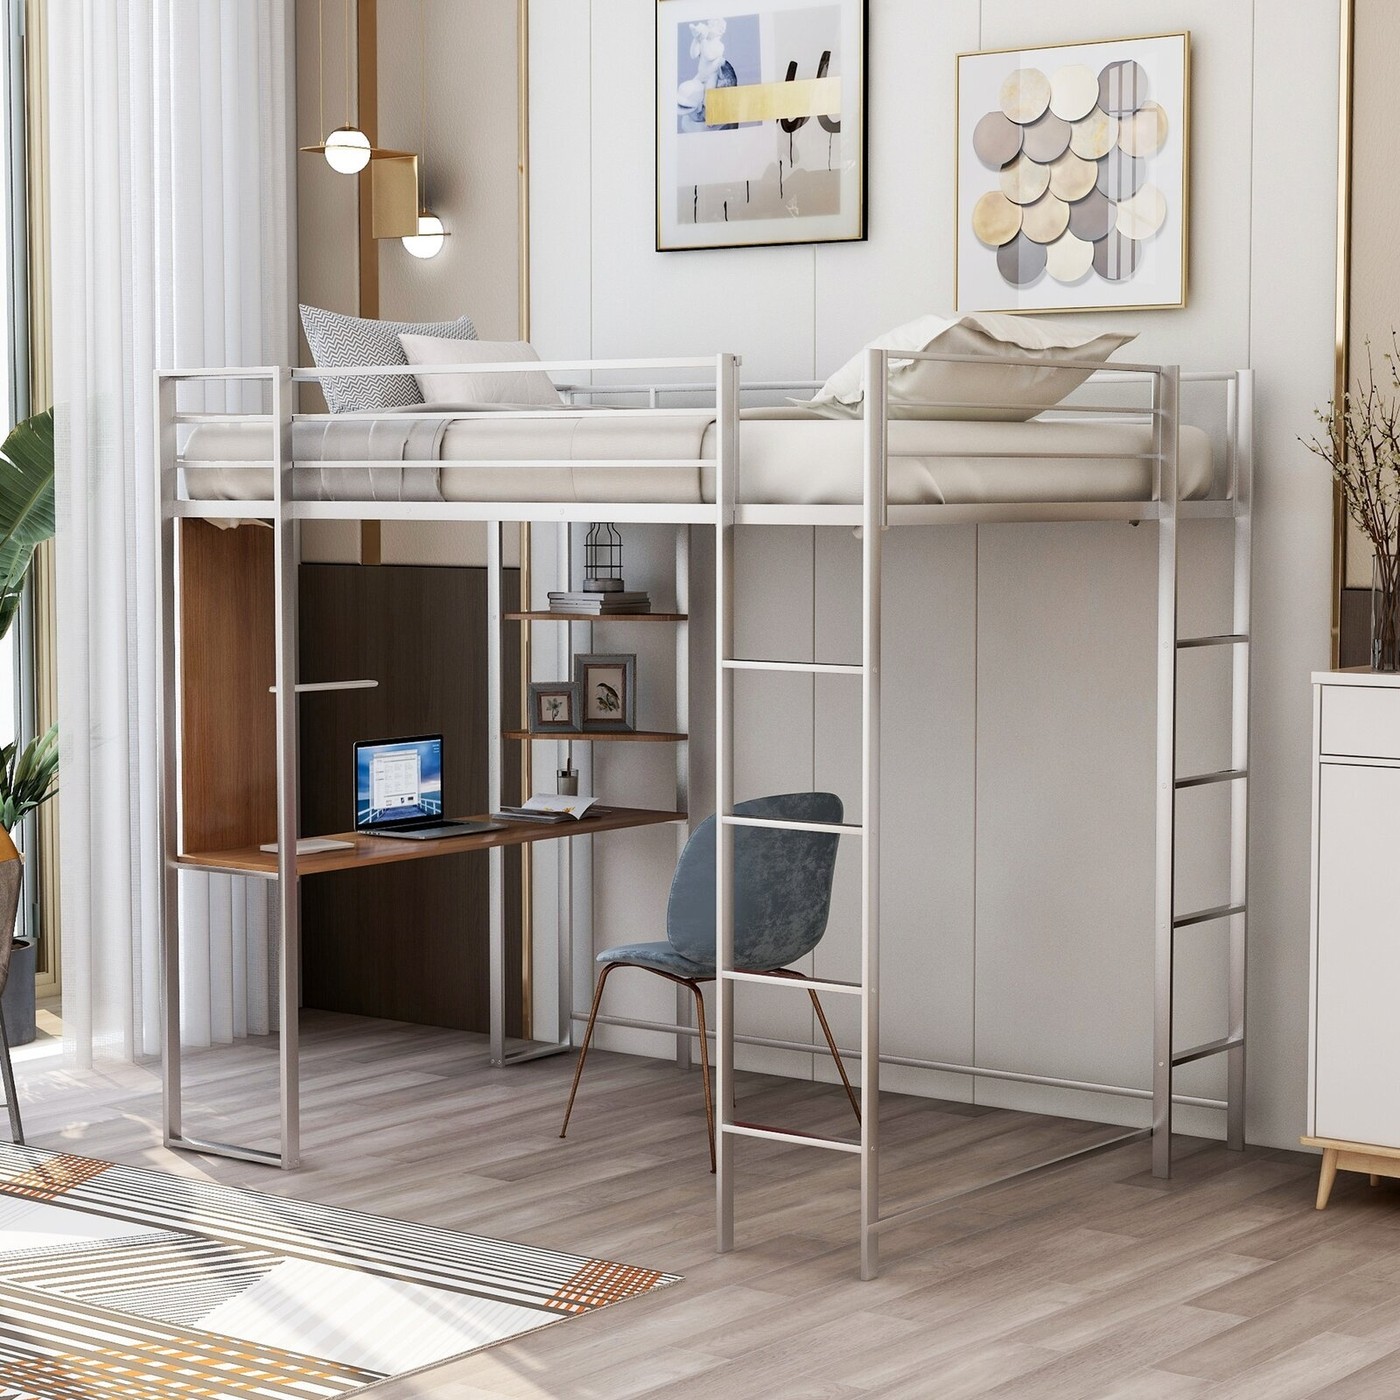 15 Exceptional Loft Beds For S